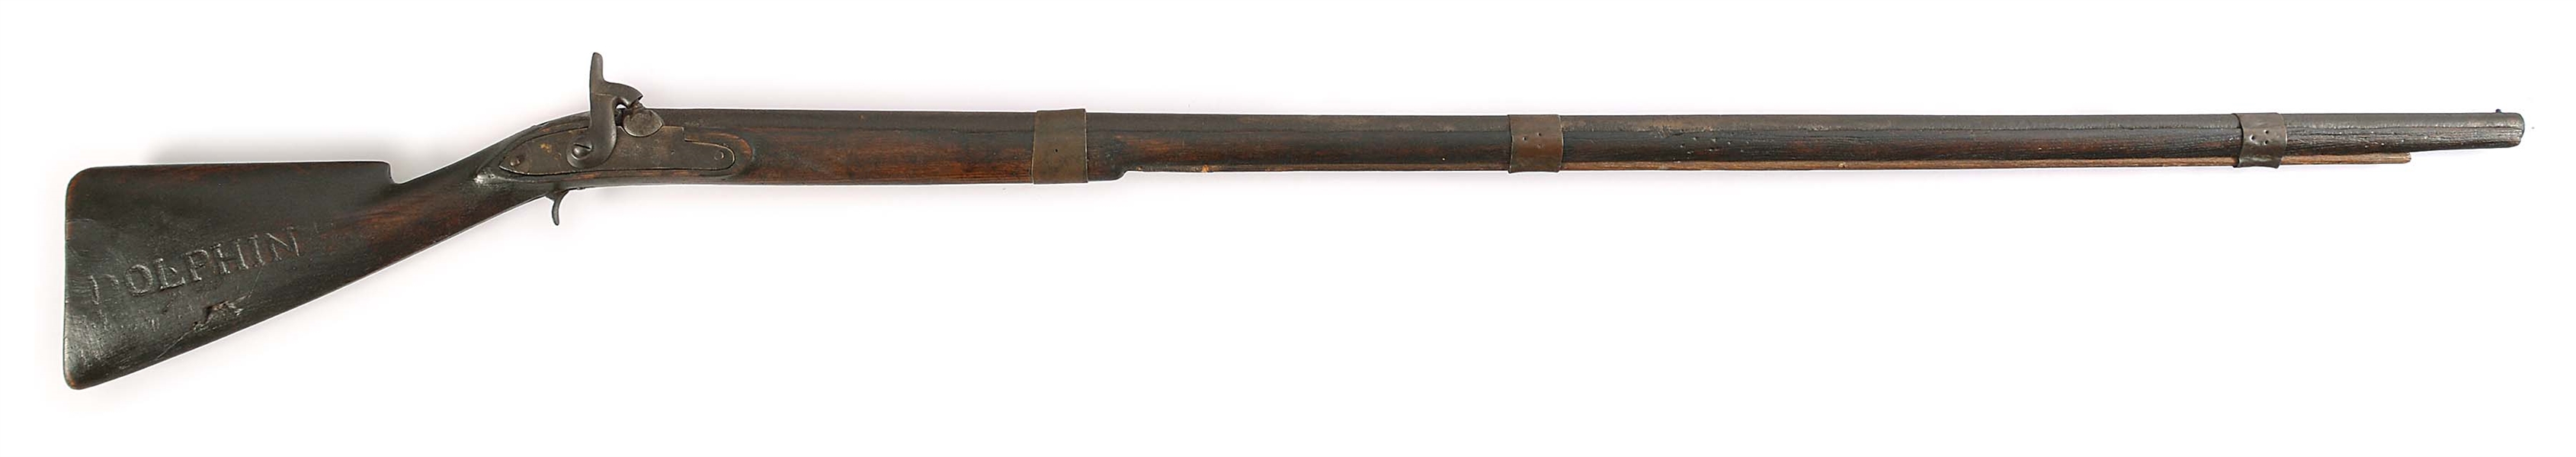 (A) A UNIQUE AND MOST INTERESTING MASSIVE .90 CALIBER PERCUSSION GUN WITH NEARLY 5 LONG BARREL, CONVERTED FROM FLINTLOCK.